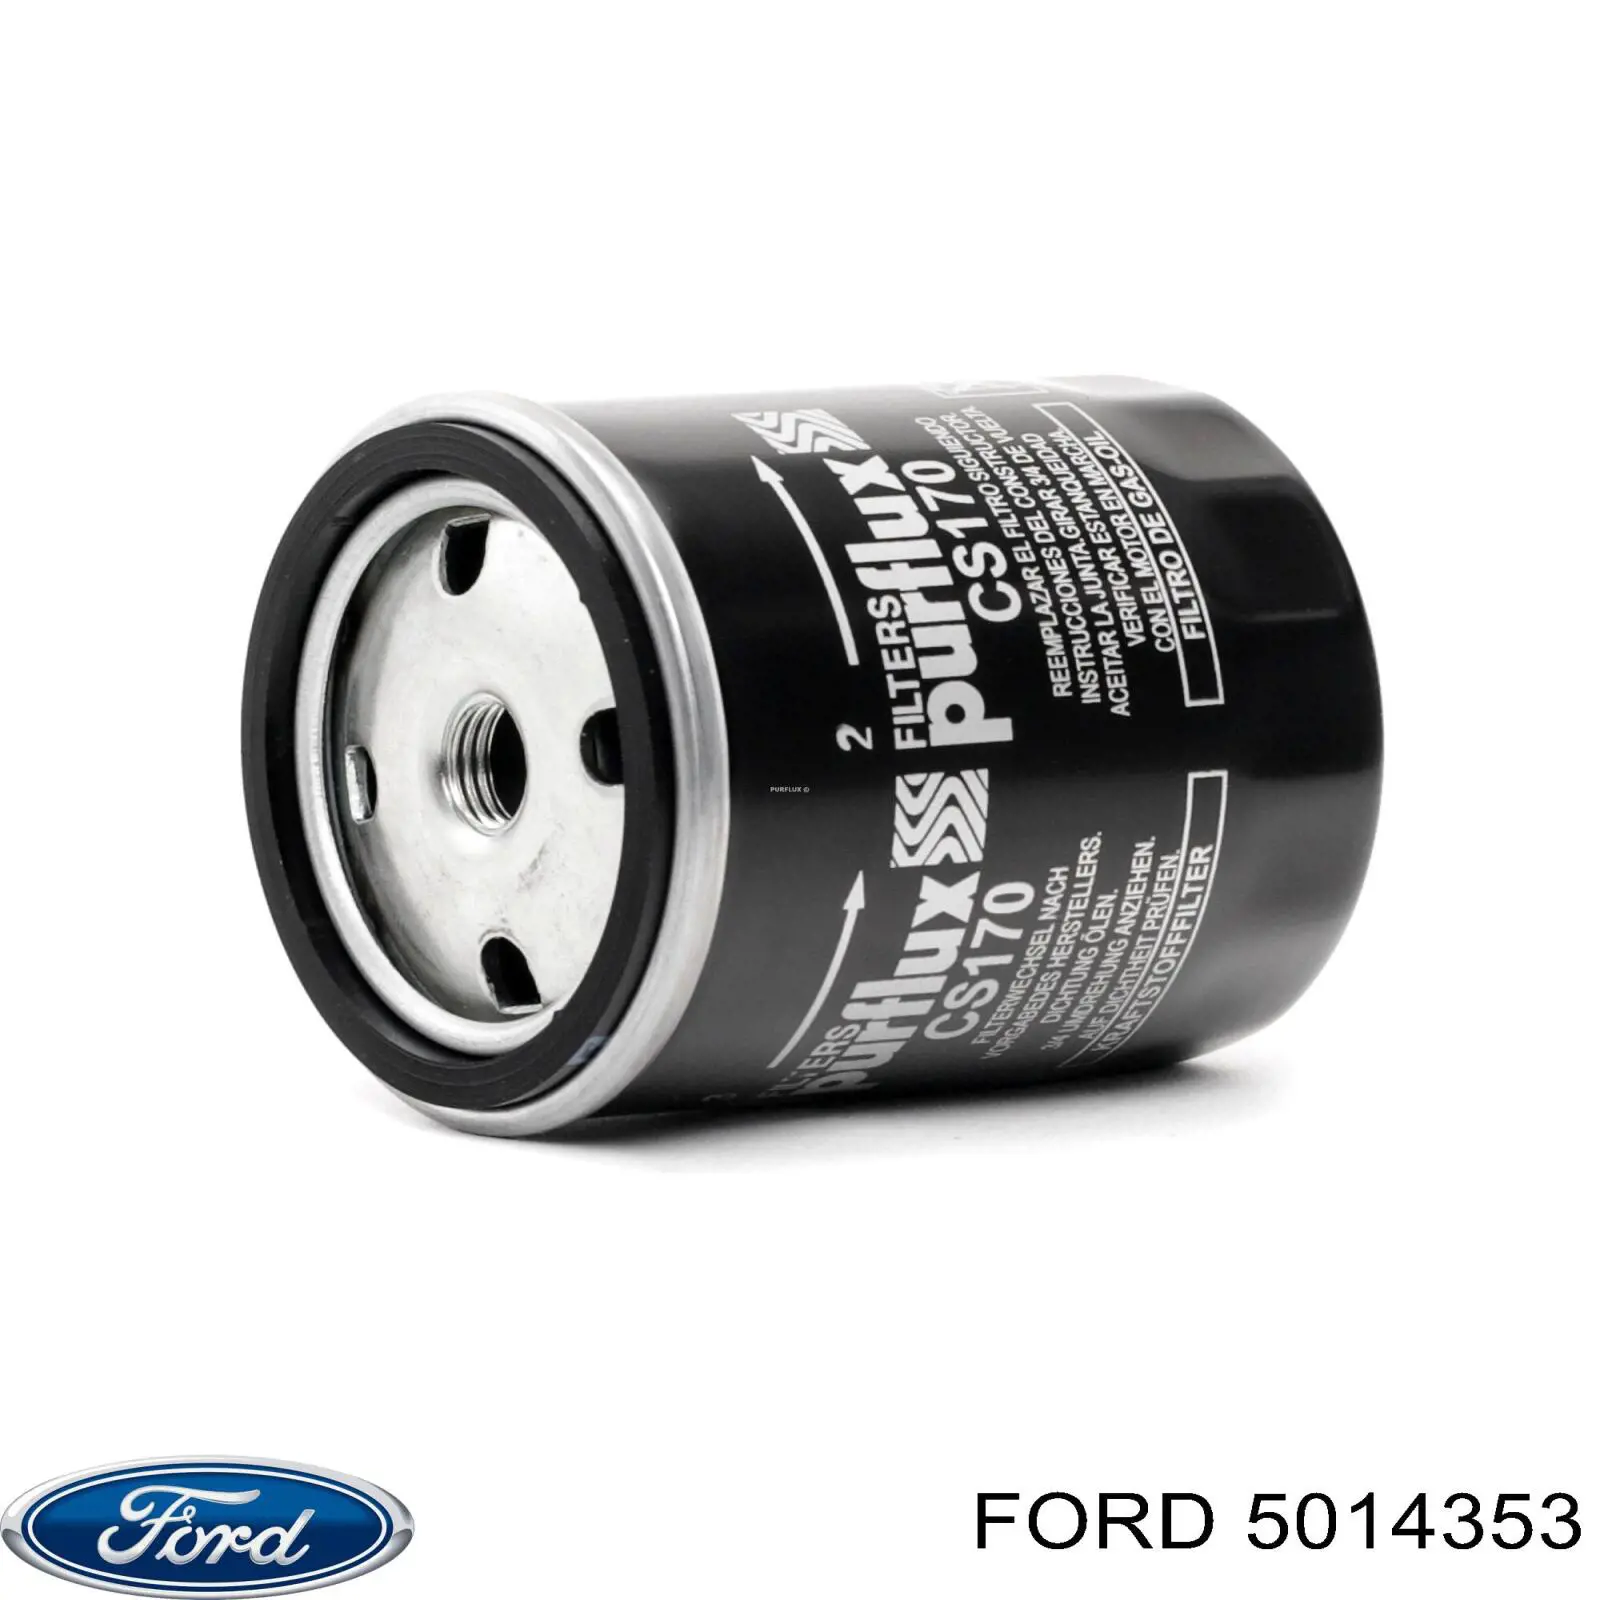 5014353 Ford filtro combustible